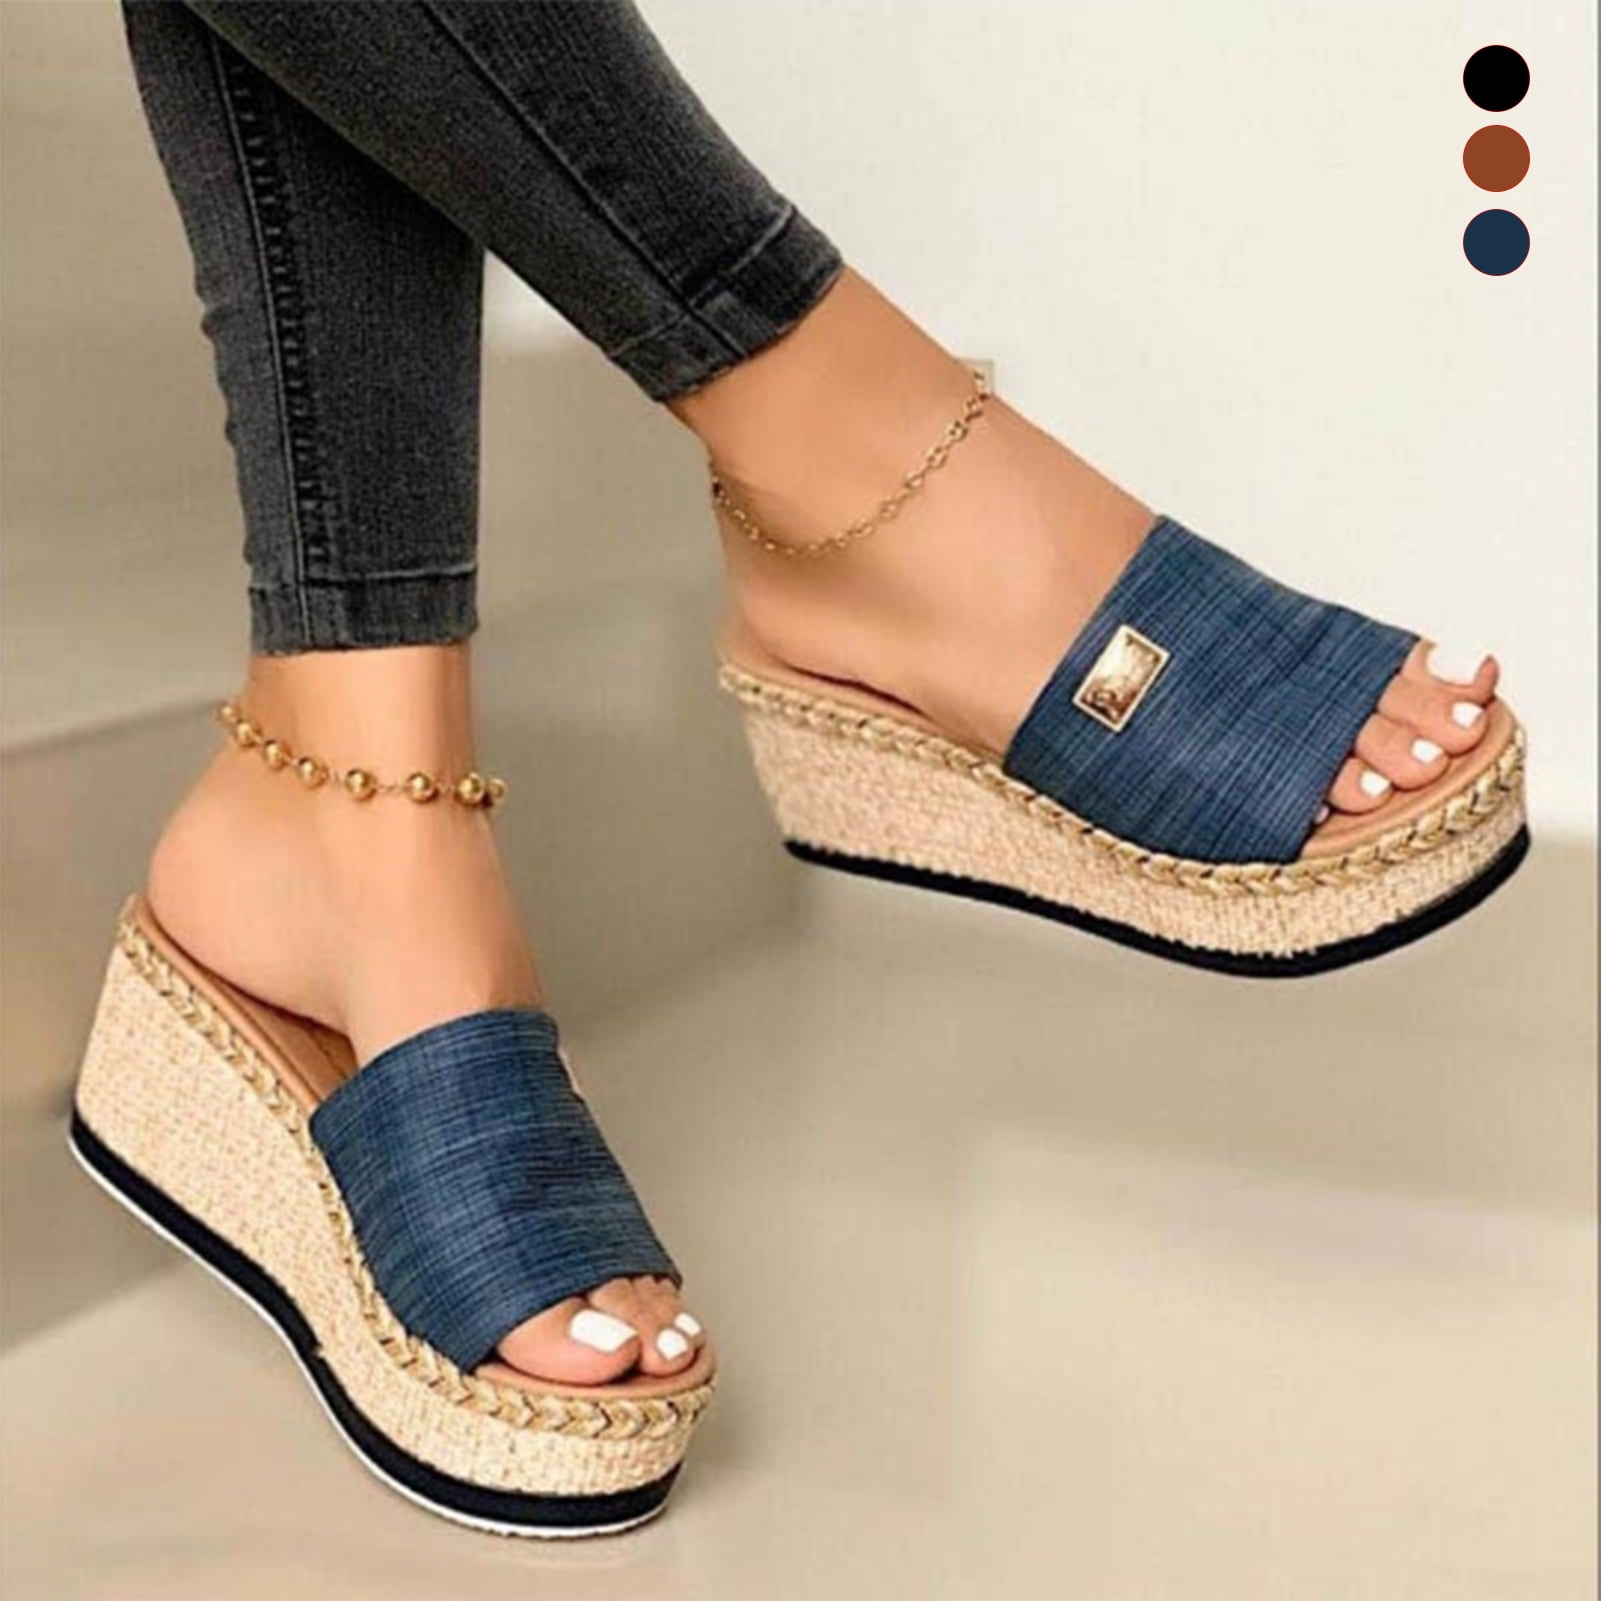 Details about   Womens Ladies Casual Espadrilles Pumps Shoes Wedge Heel Flatform Loafers Size 